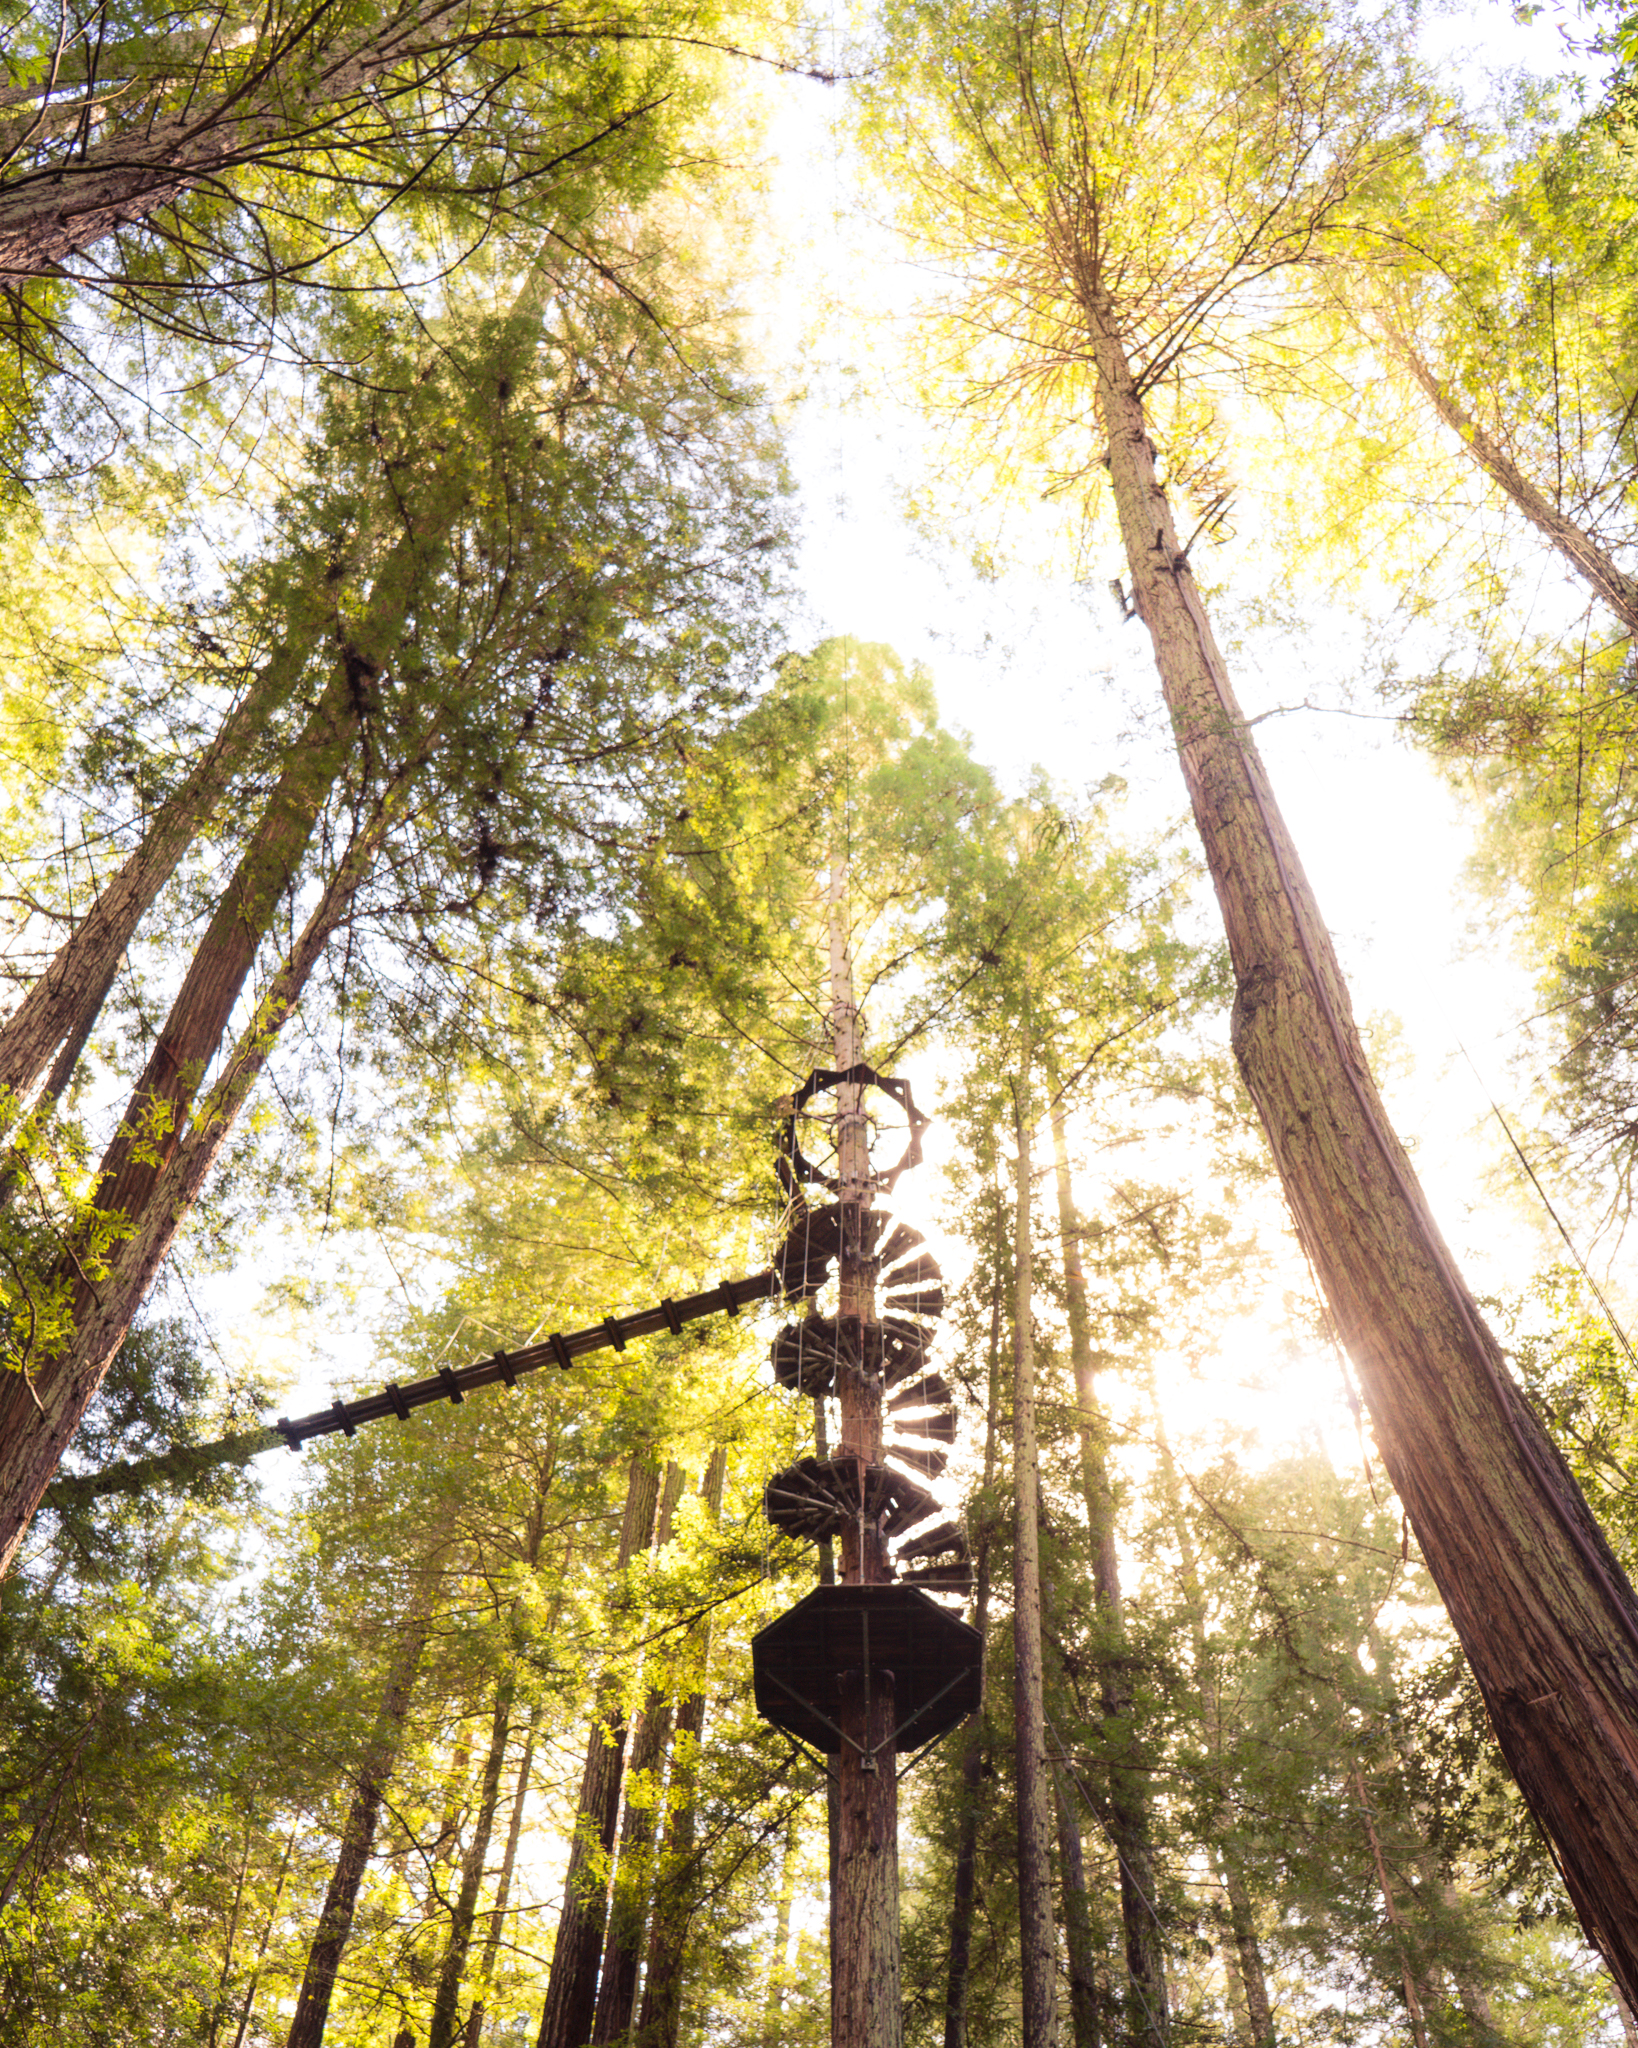 Part of the extremely fun zip line at Sonoma Canopy Tours!